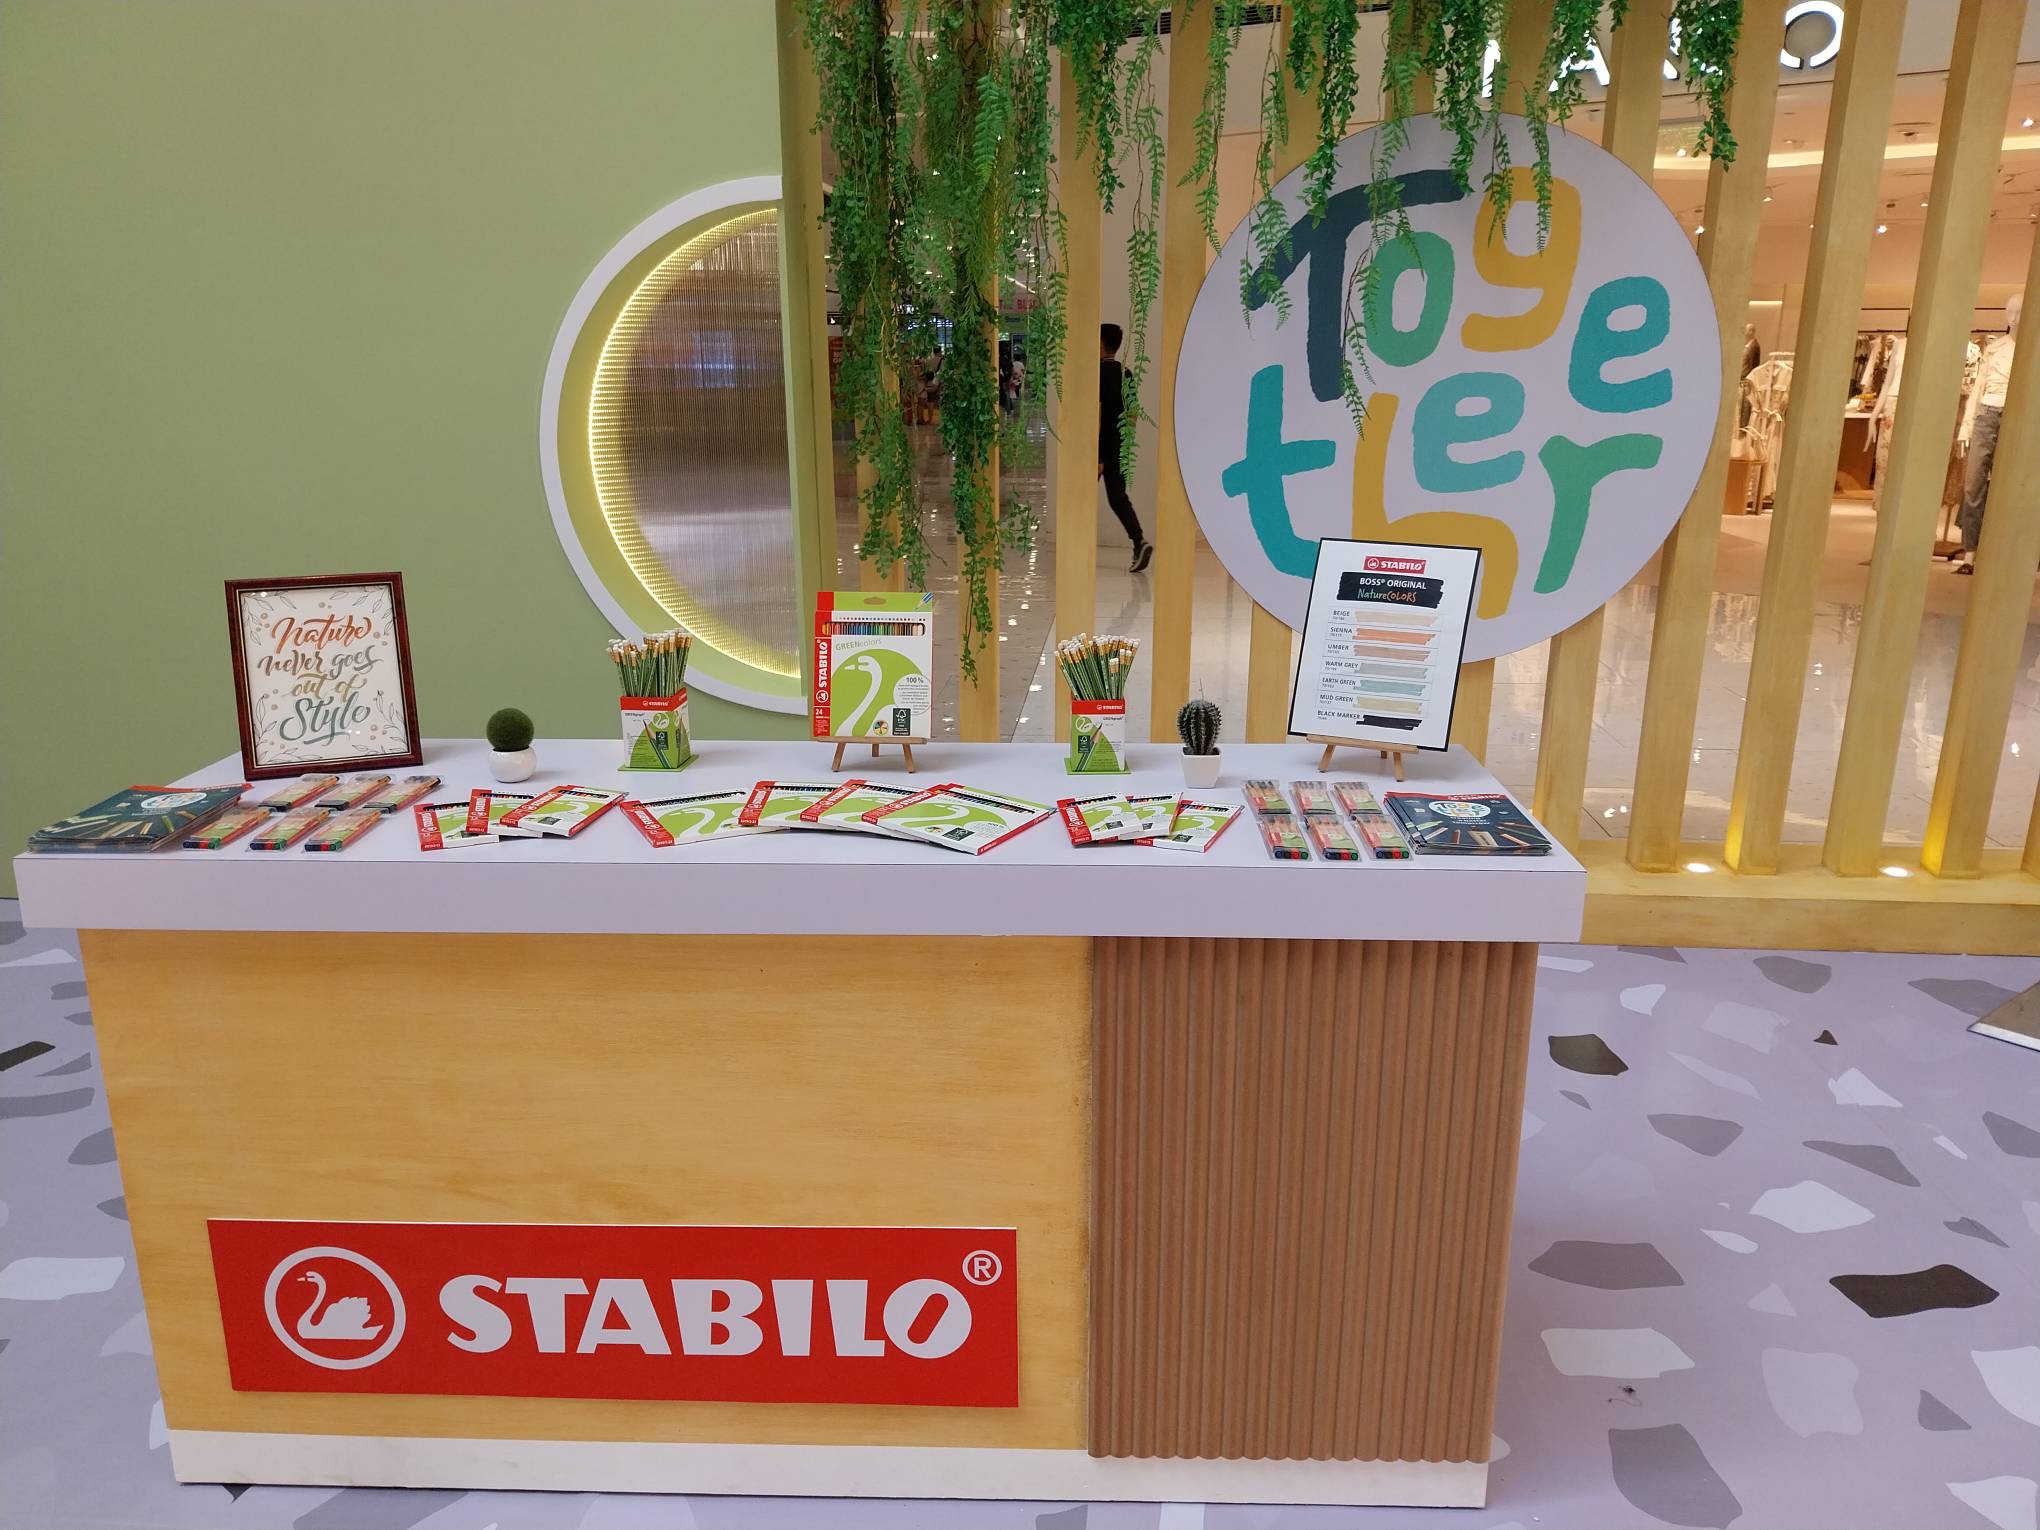 The "Together" stall for Stabilo's sustainability program. Photo by Elle Yap.